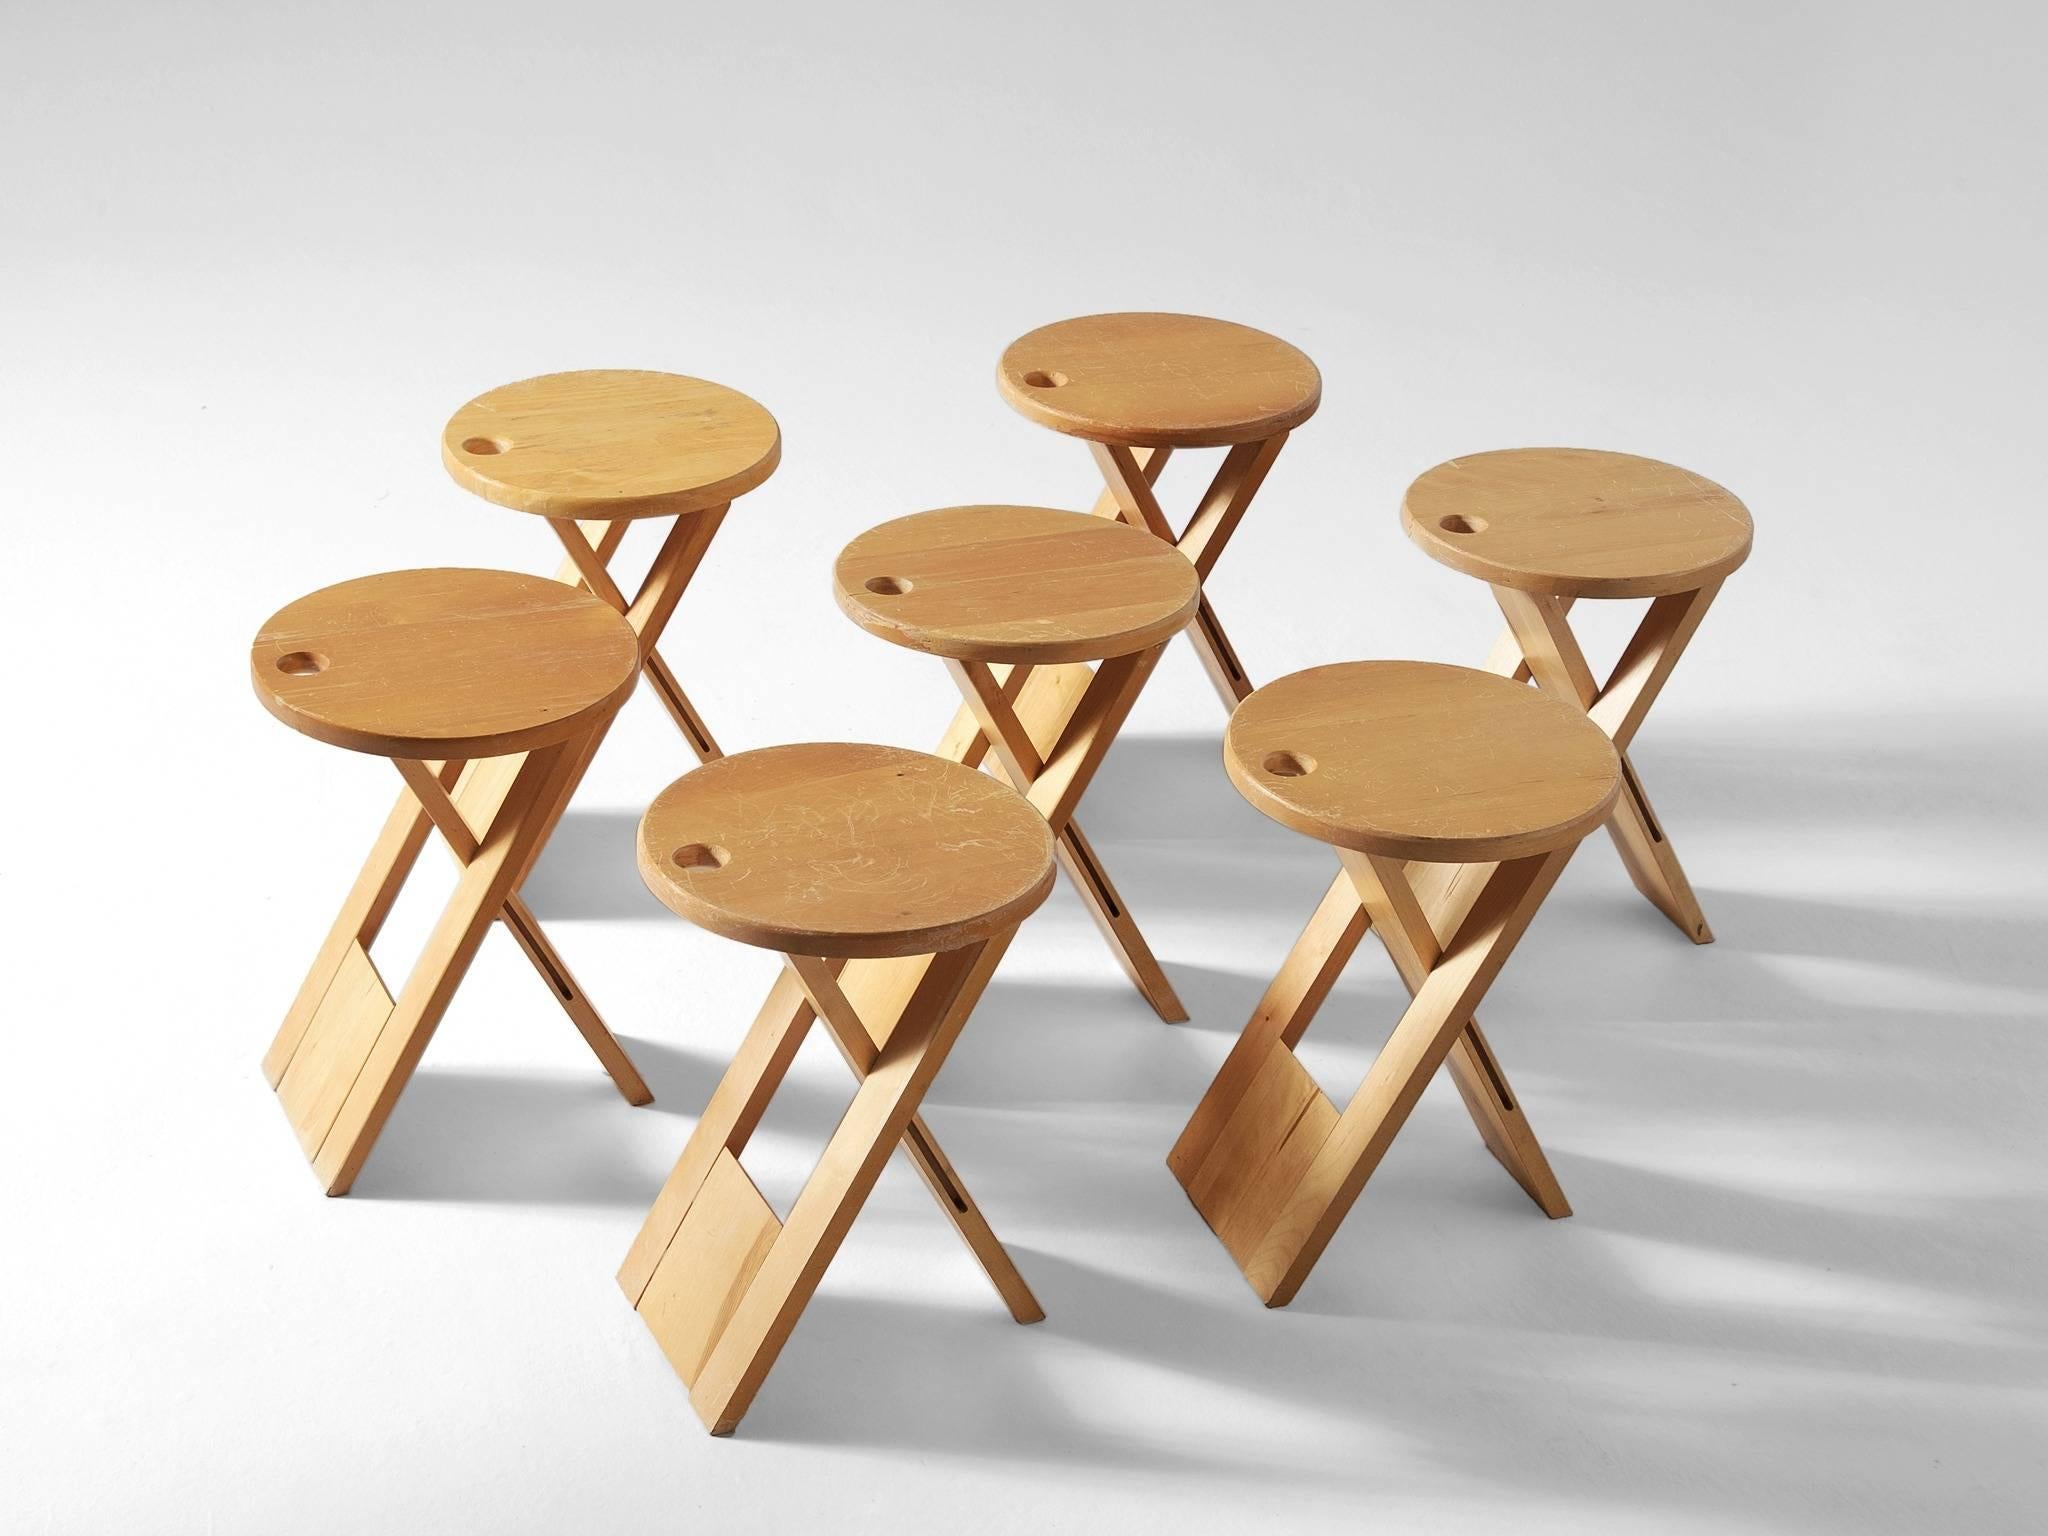 Set of four foldable stools in maple by Roger Tallon, France 1970s. 

Ingeniously designed retractable stools. Set of seven maple stools, which can easily be placed and fold up. The appearance of these round stool is simplistic, yet the design is